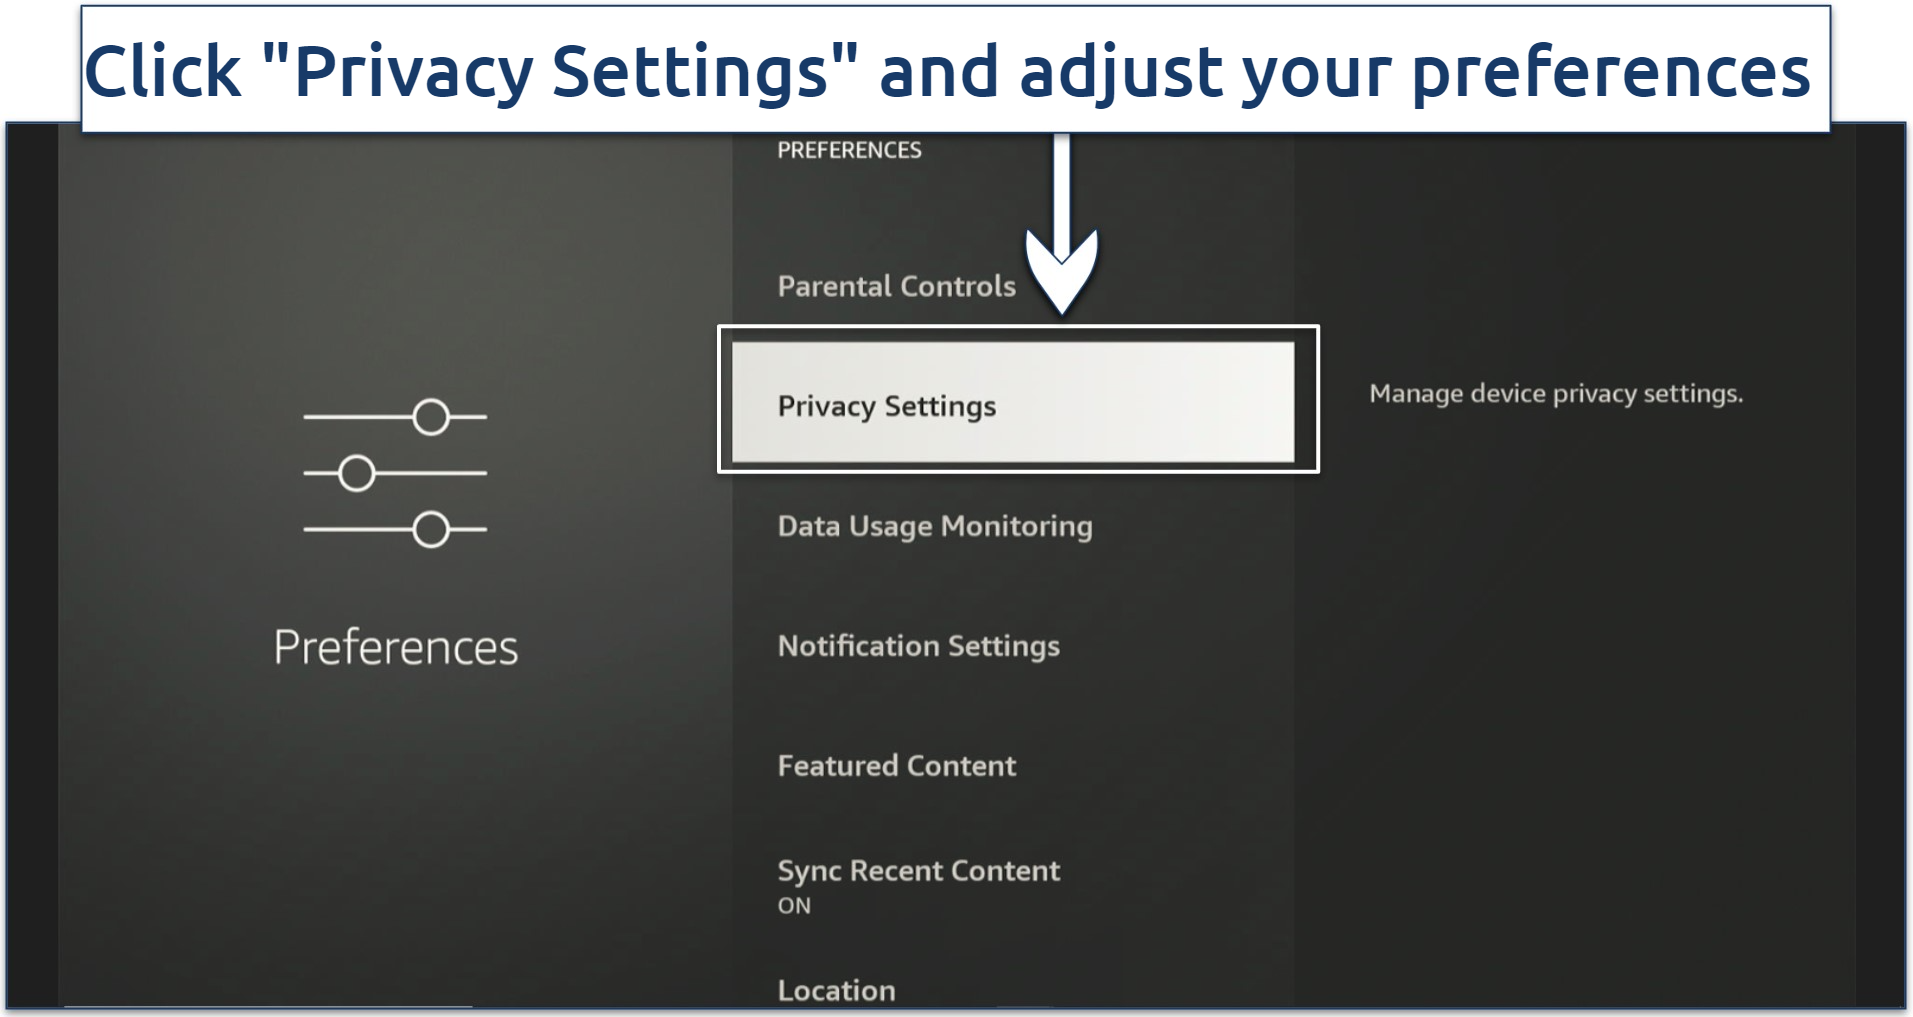 A screenshot showing Privacy Settings button